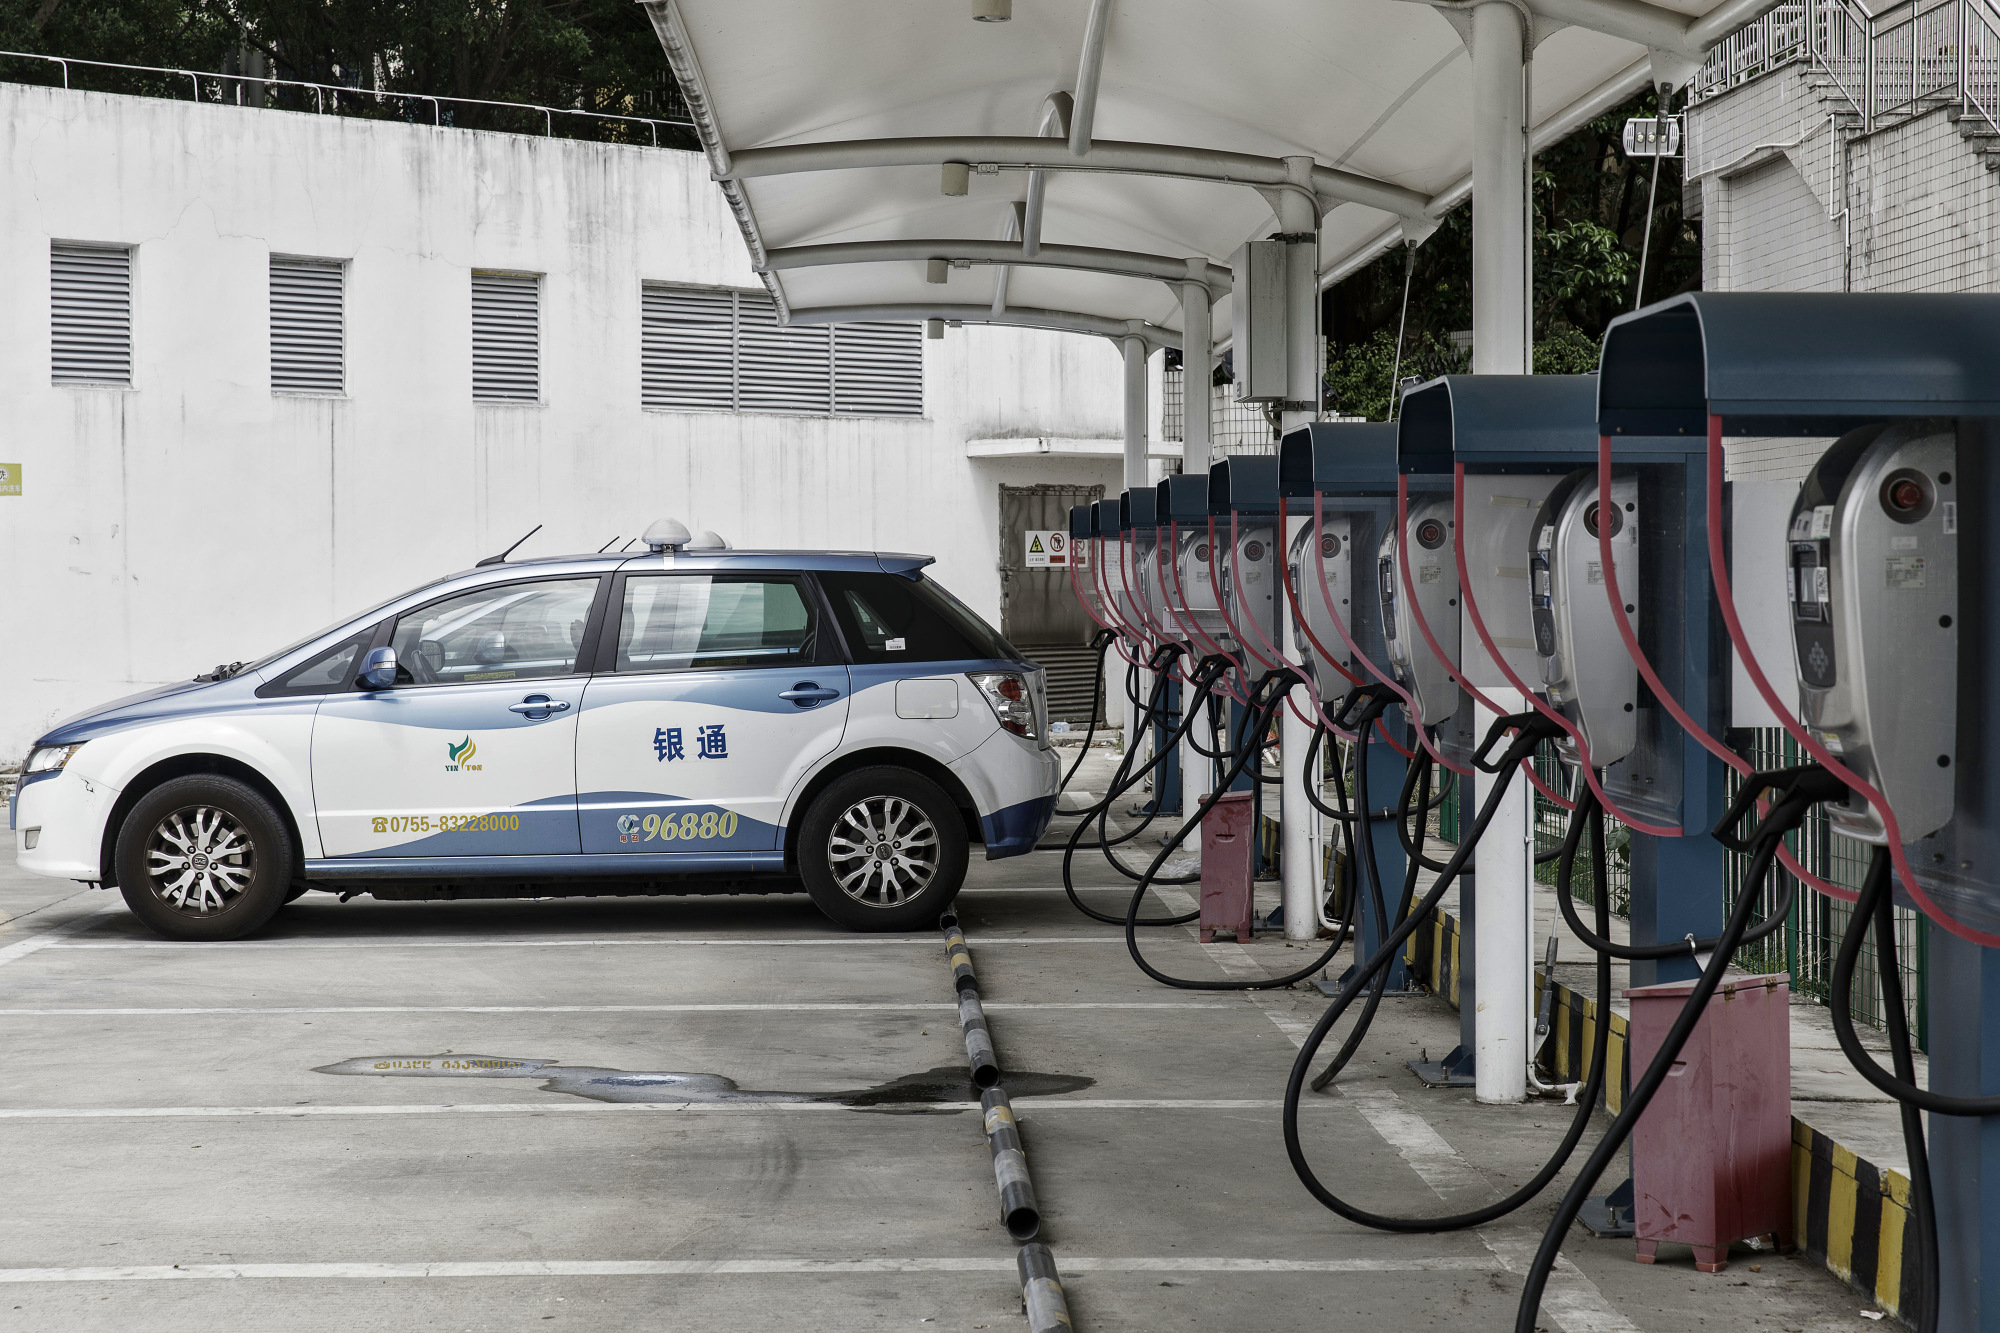 China Scales Back Subsidies for Electric Cars to Spur Innovation